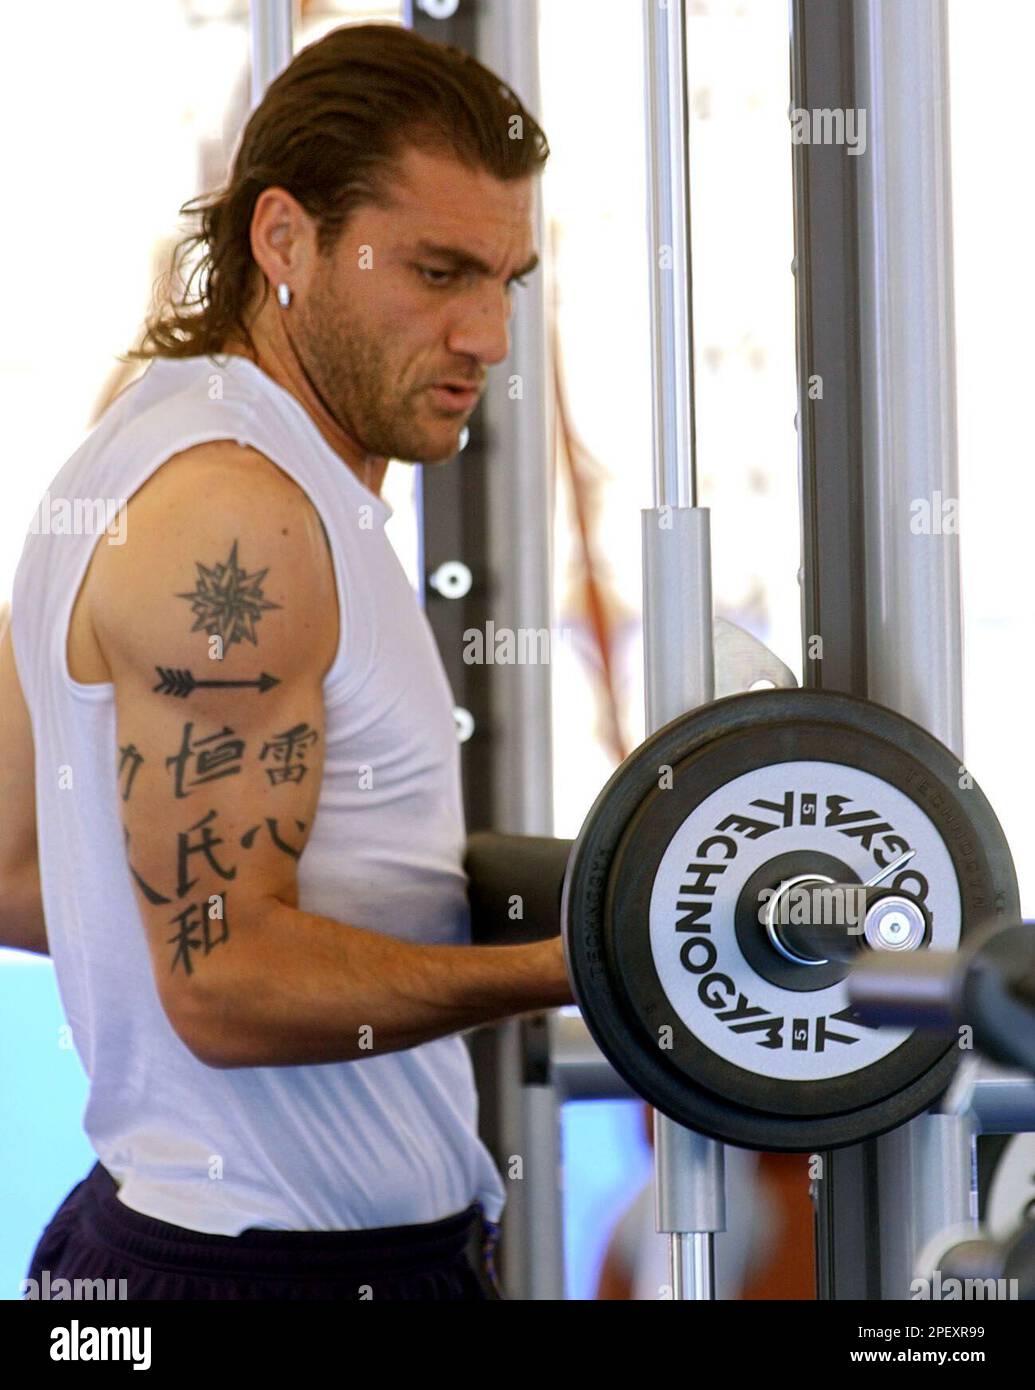 Italy's Christian Vieri sports a Chinese characters tattoo during a  training session with his team in Lisbon's Restelo stadium, Thursday, June  10, 2004. Italy is in Portugal to participate in the Euro